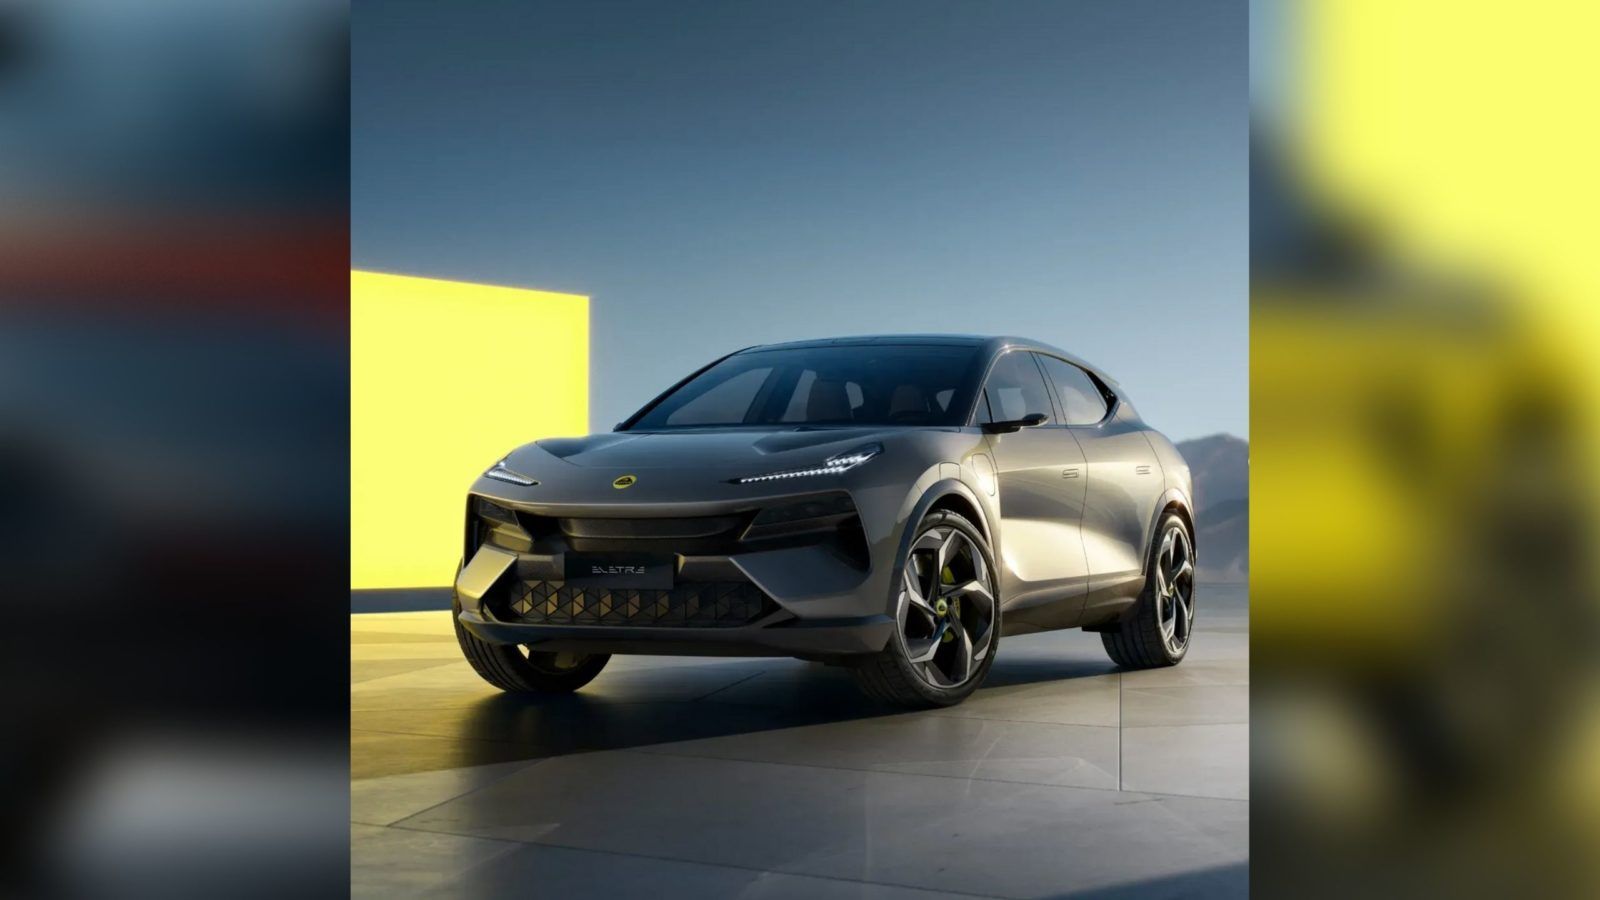 The Lotus Eletre is the world’s first electric Hyper-SUV